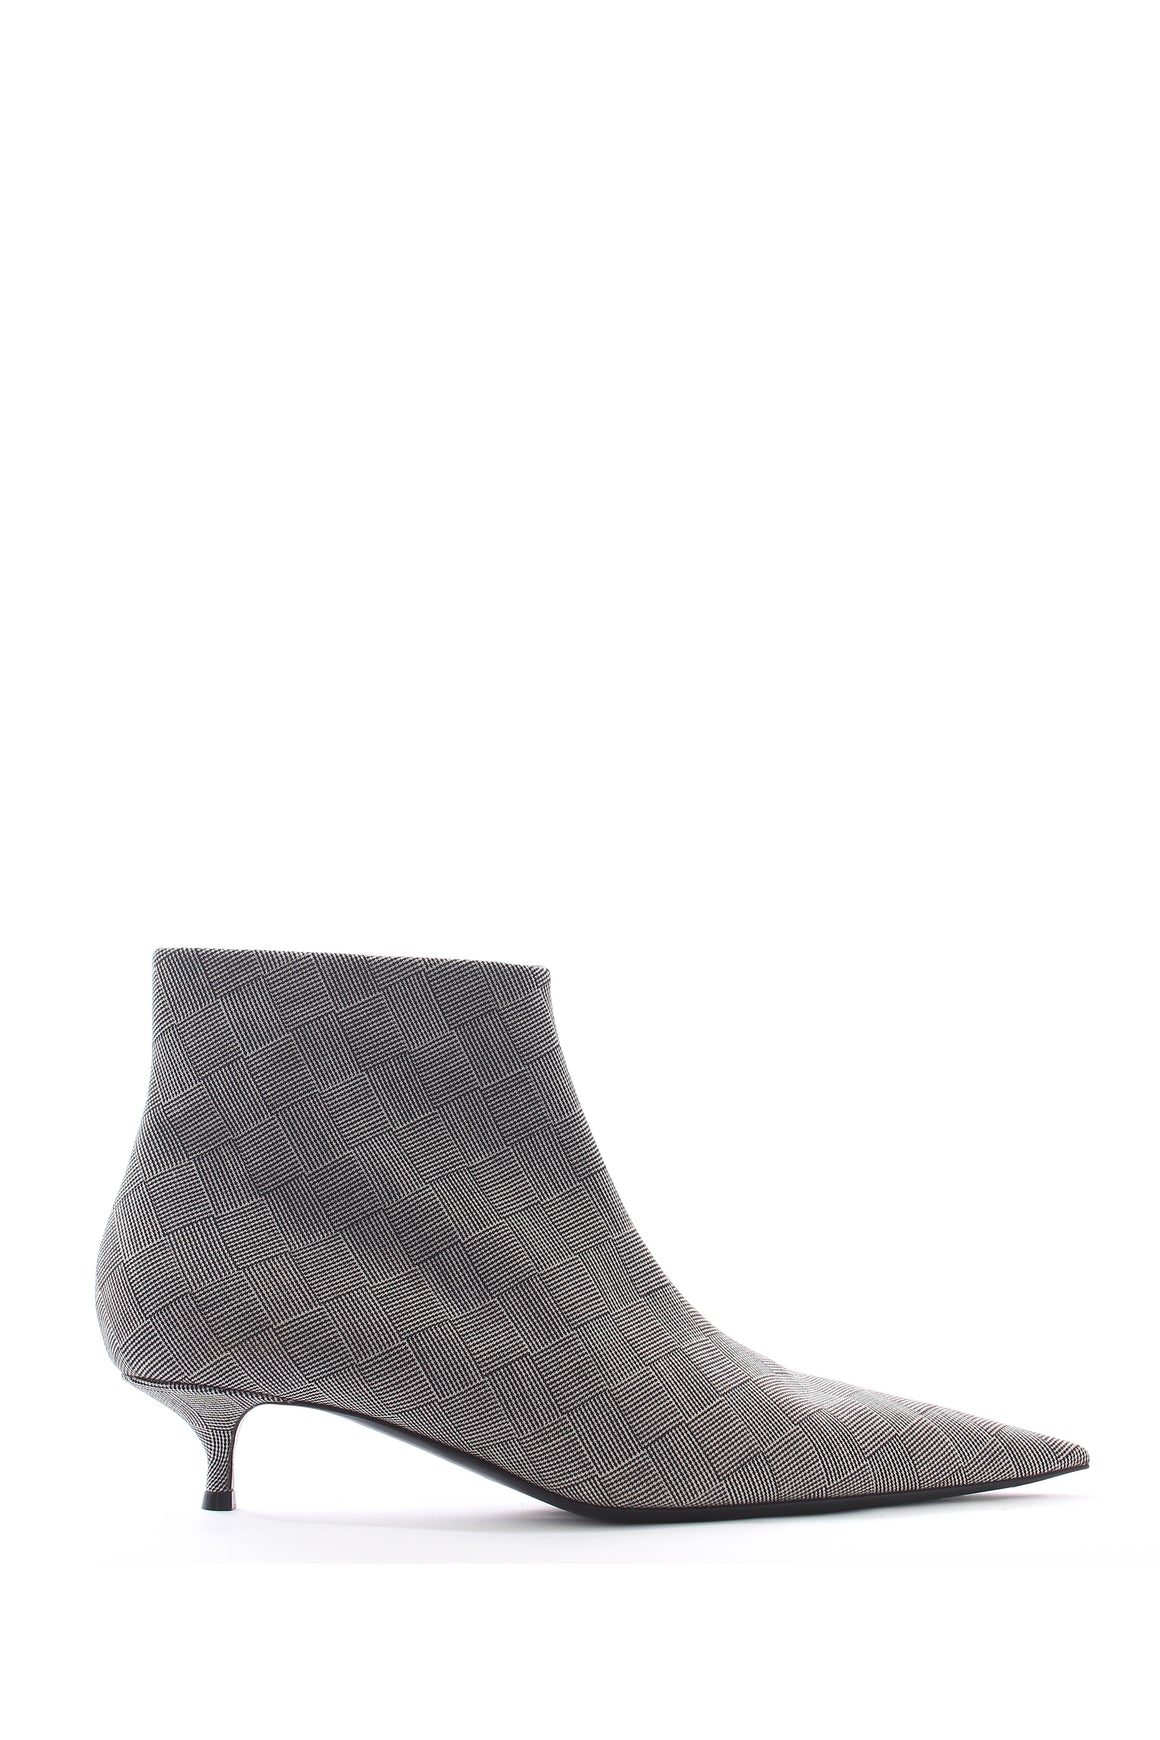 Balenciaga Knife Checked Wool Ankle Boots